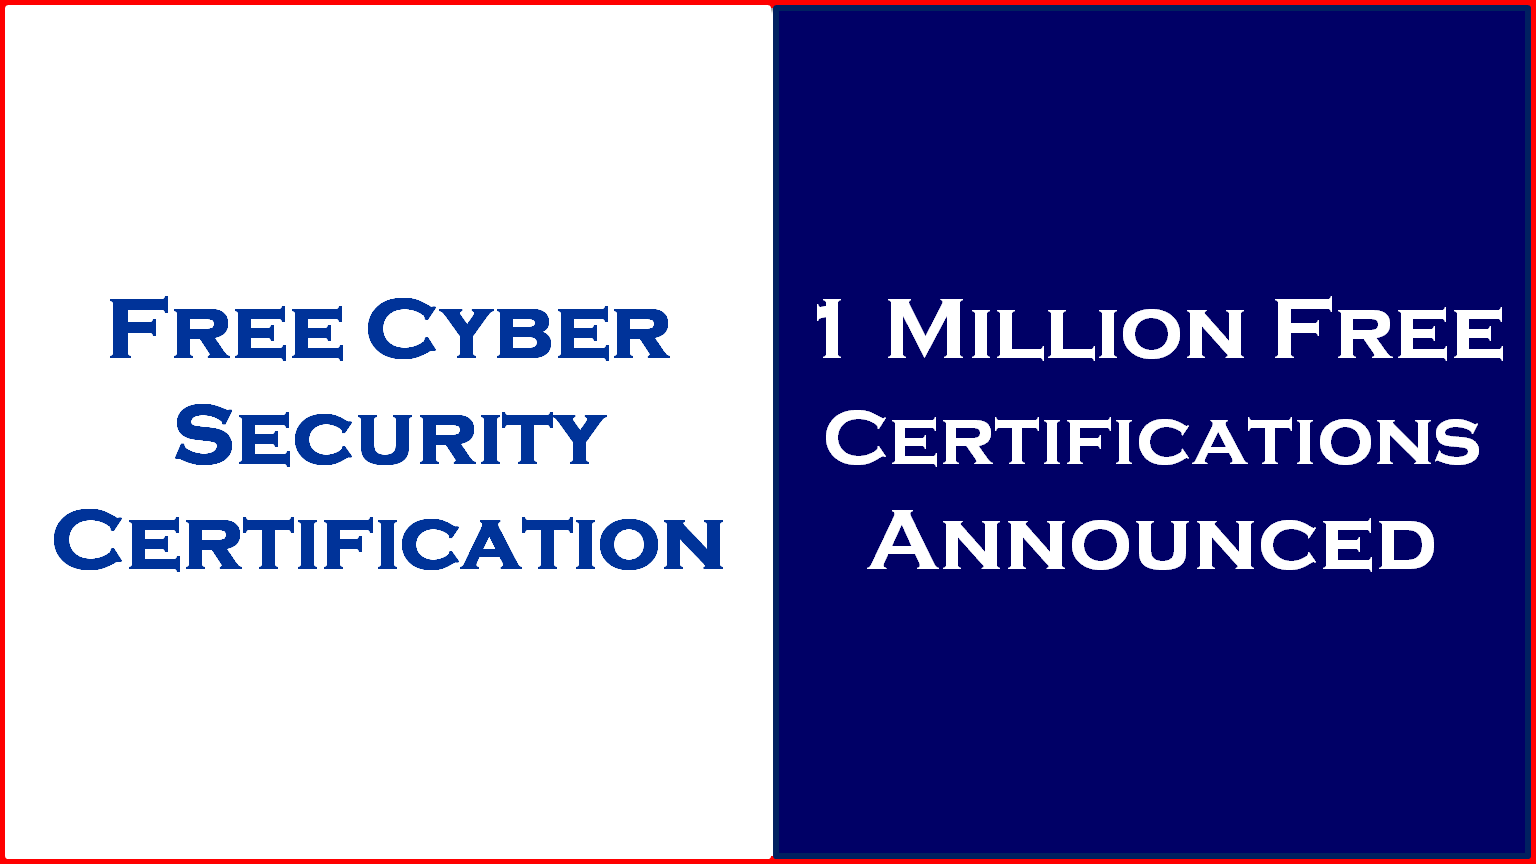 Free Cyber Security Certifications